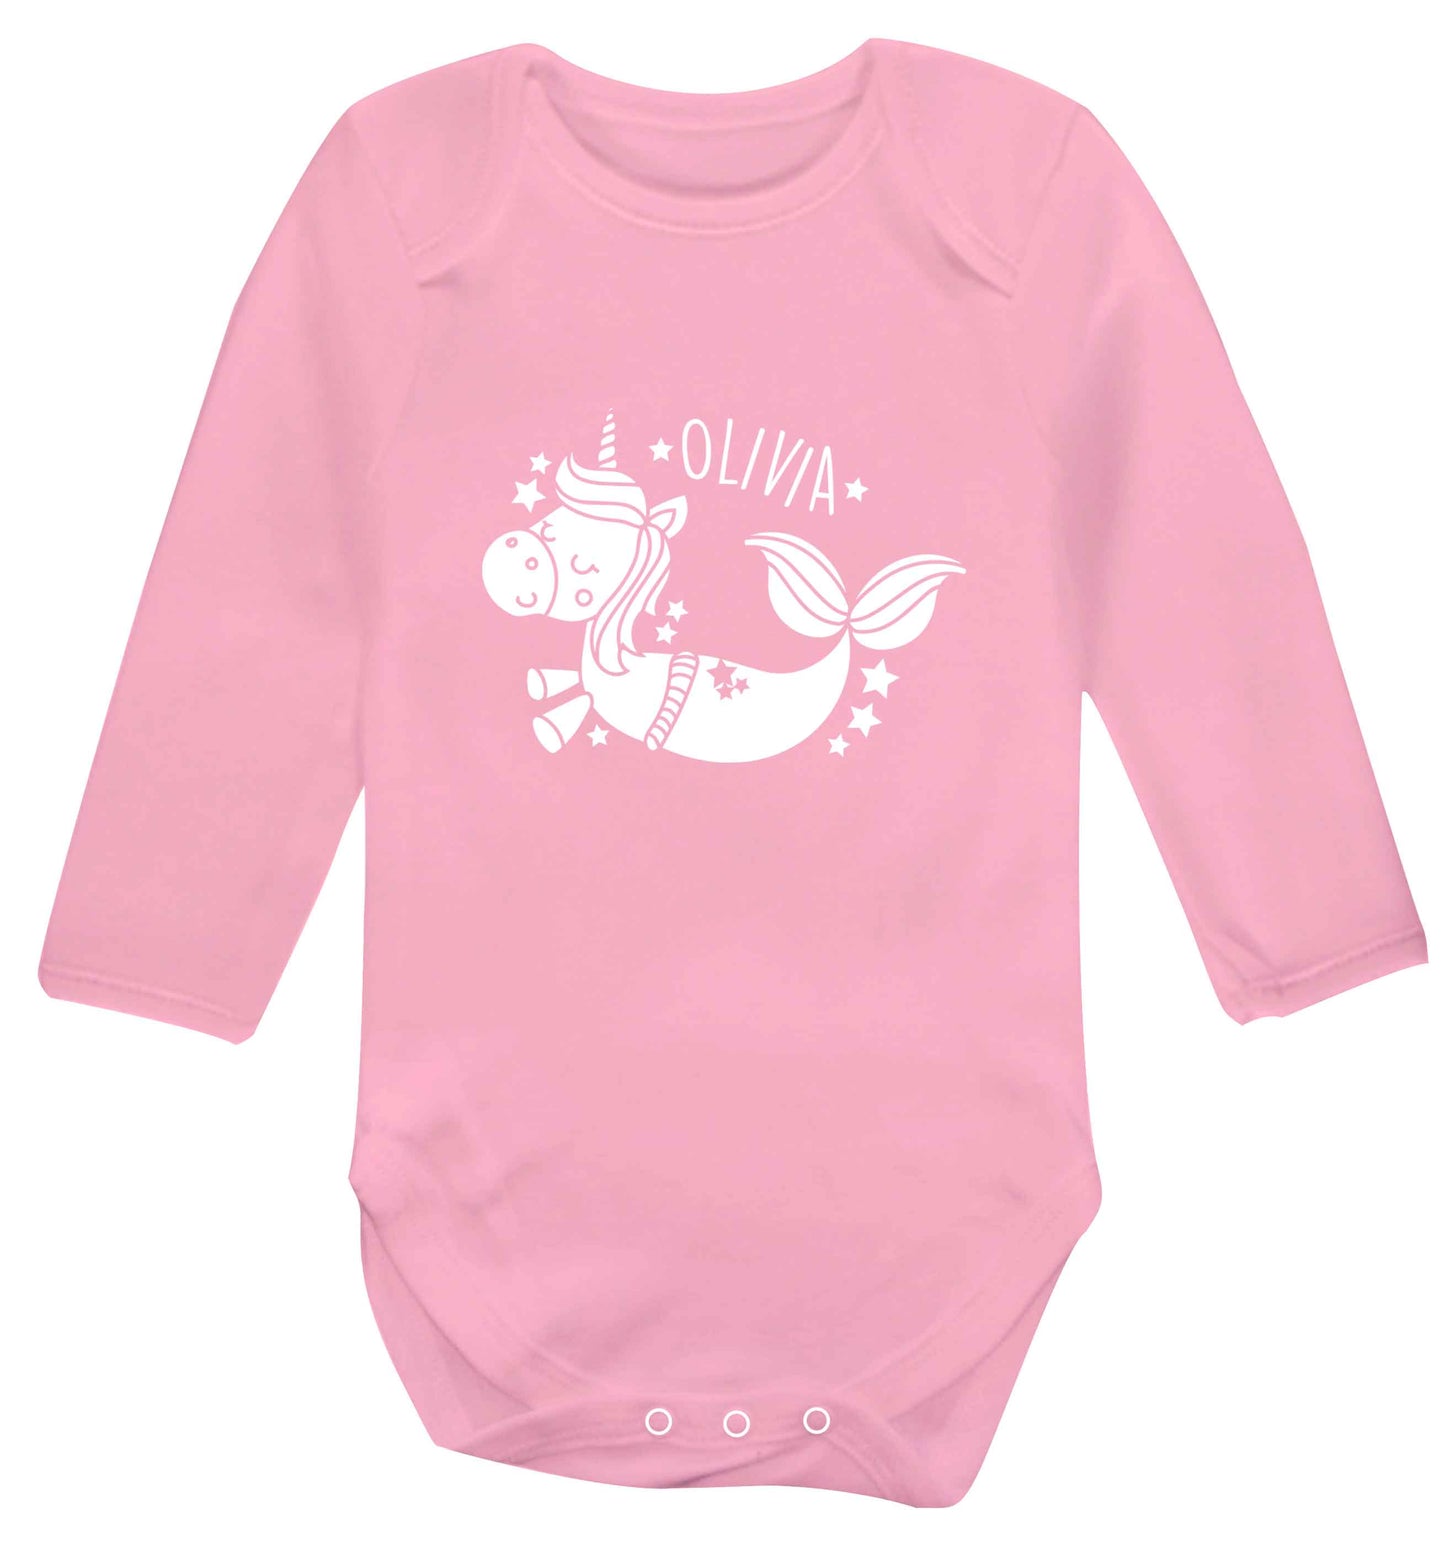 Unicorn mermaid - any name baby vest long sleeved pale pink 6-12 months